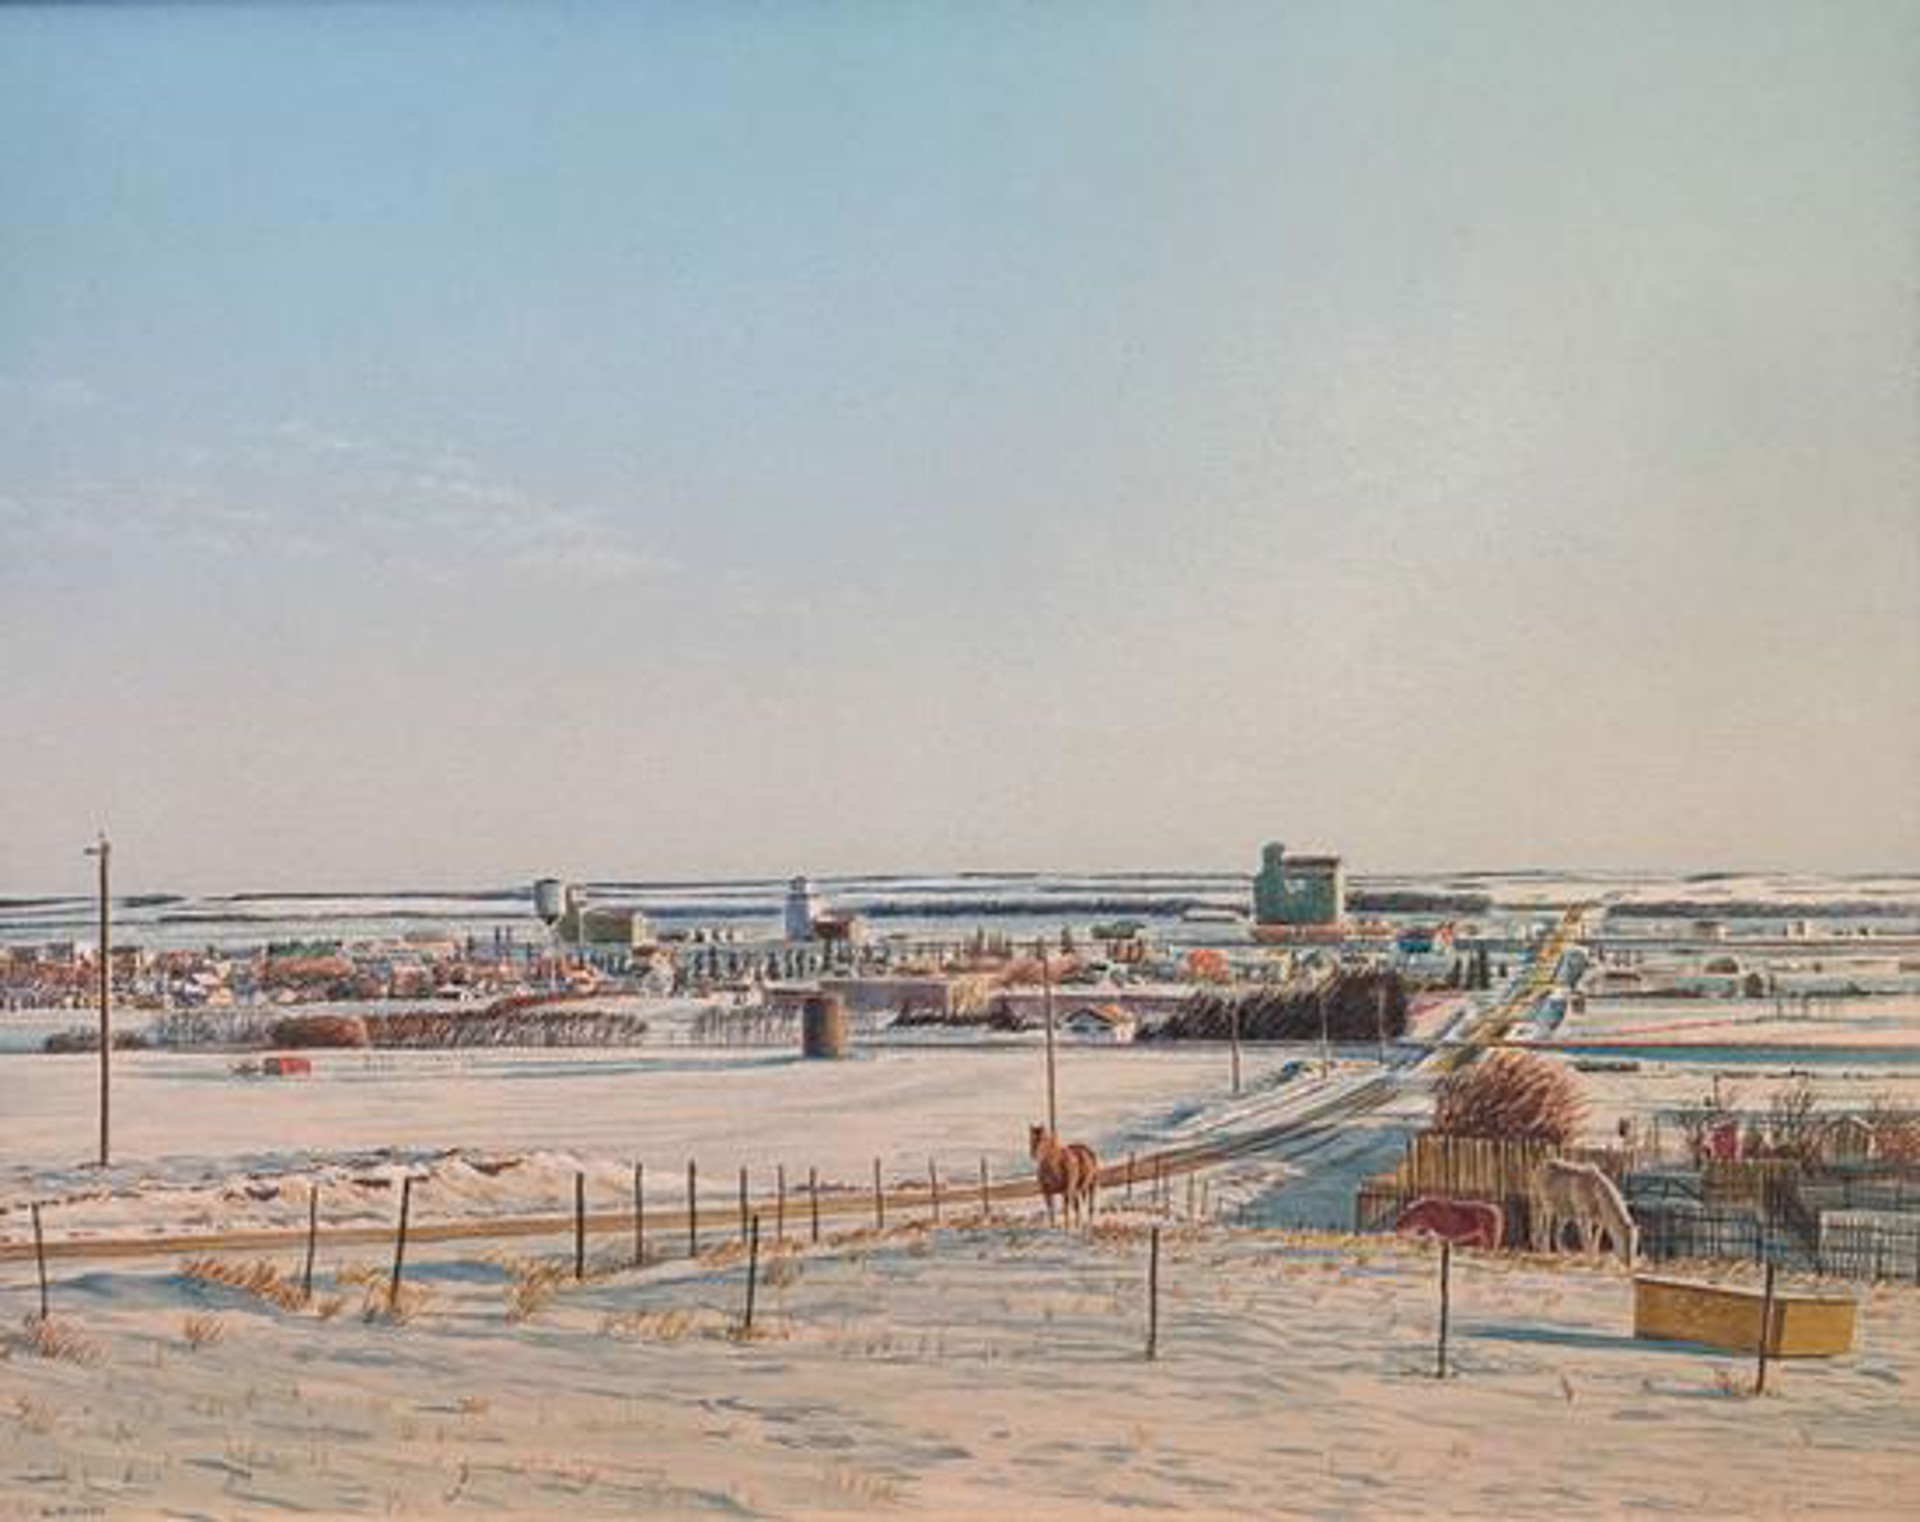 Wintered Horses Overlooking Chauvin by WH Webb (1940-2020)